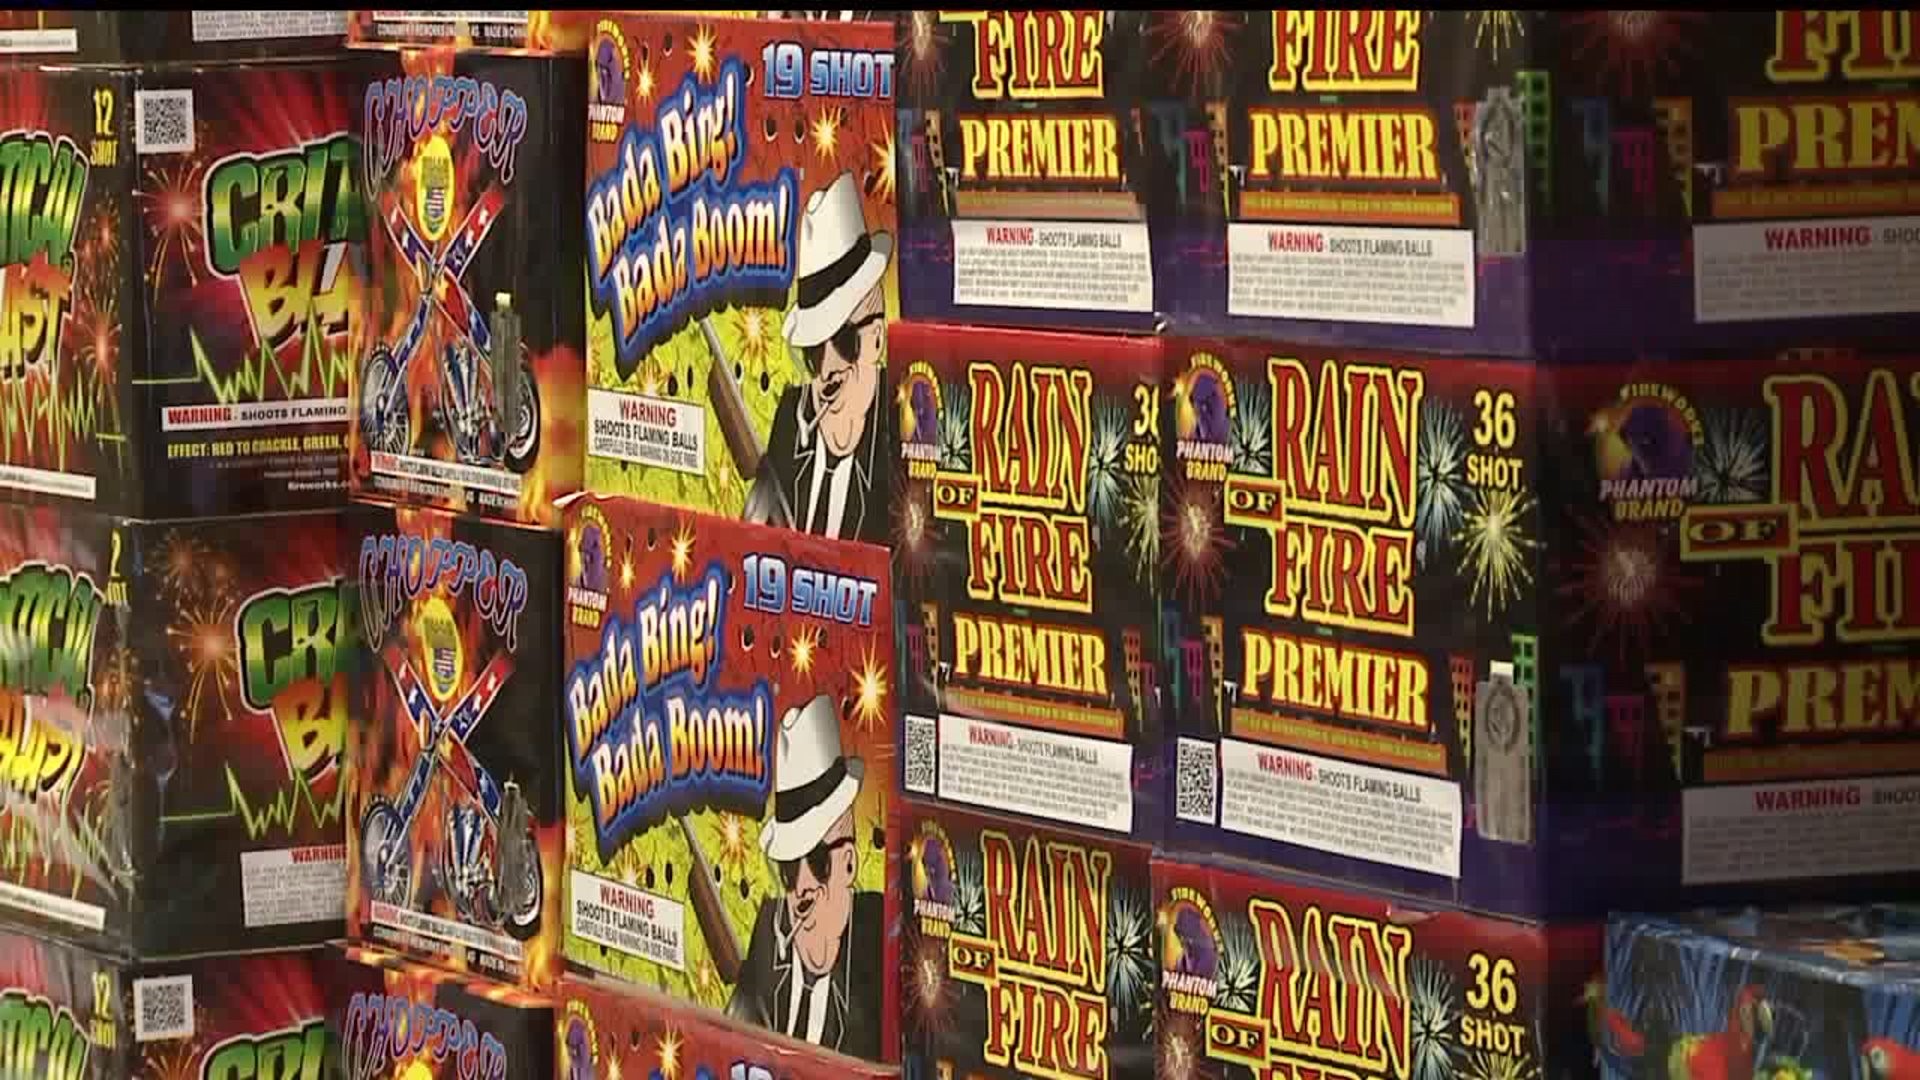 York and Lebanon counties lift their burn bans, allowing fireworks for the holiday weekend.